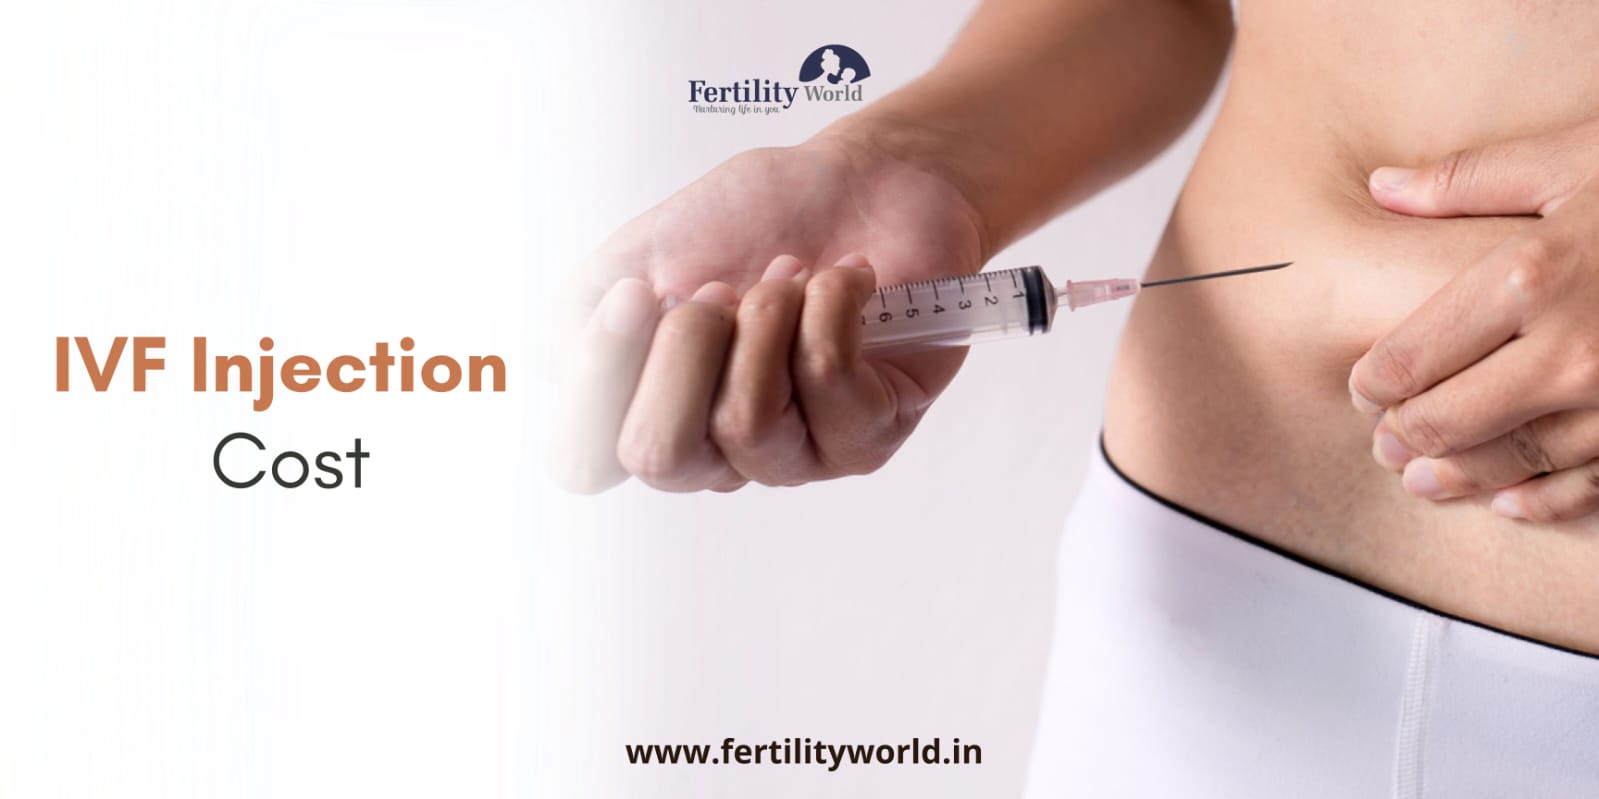 IVF injections cost in India